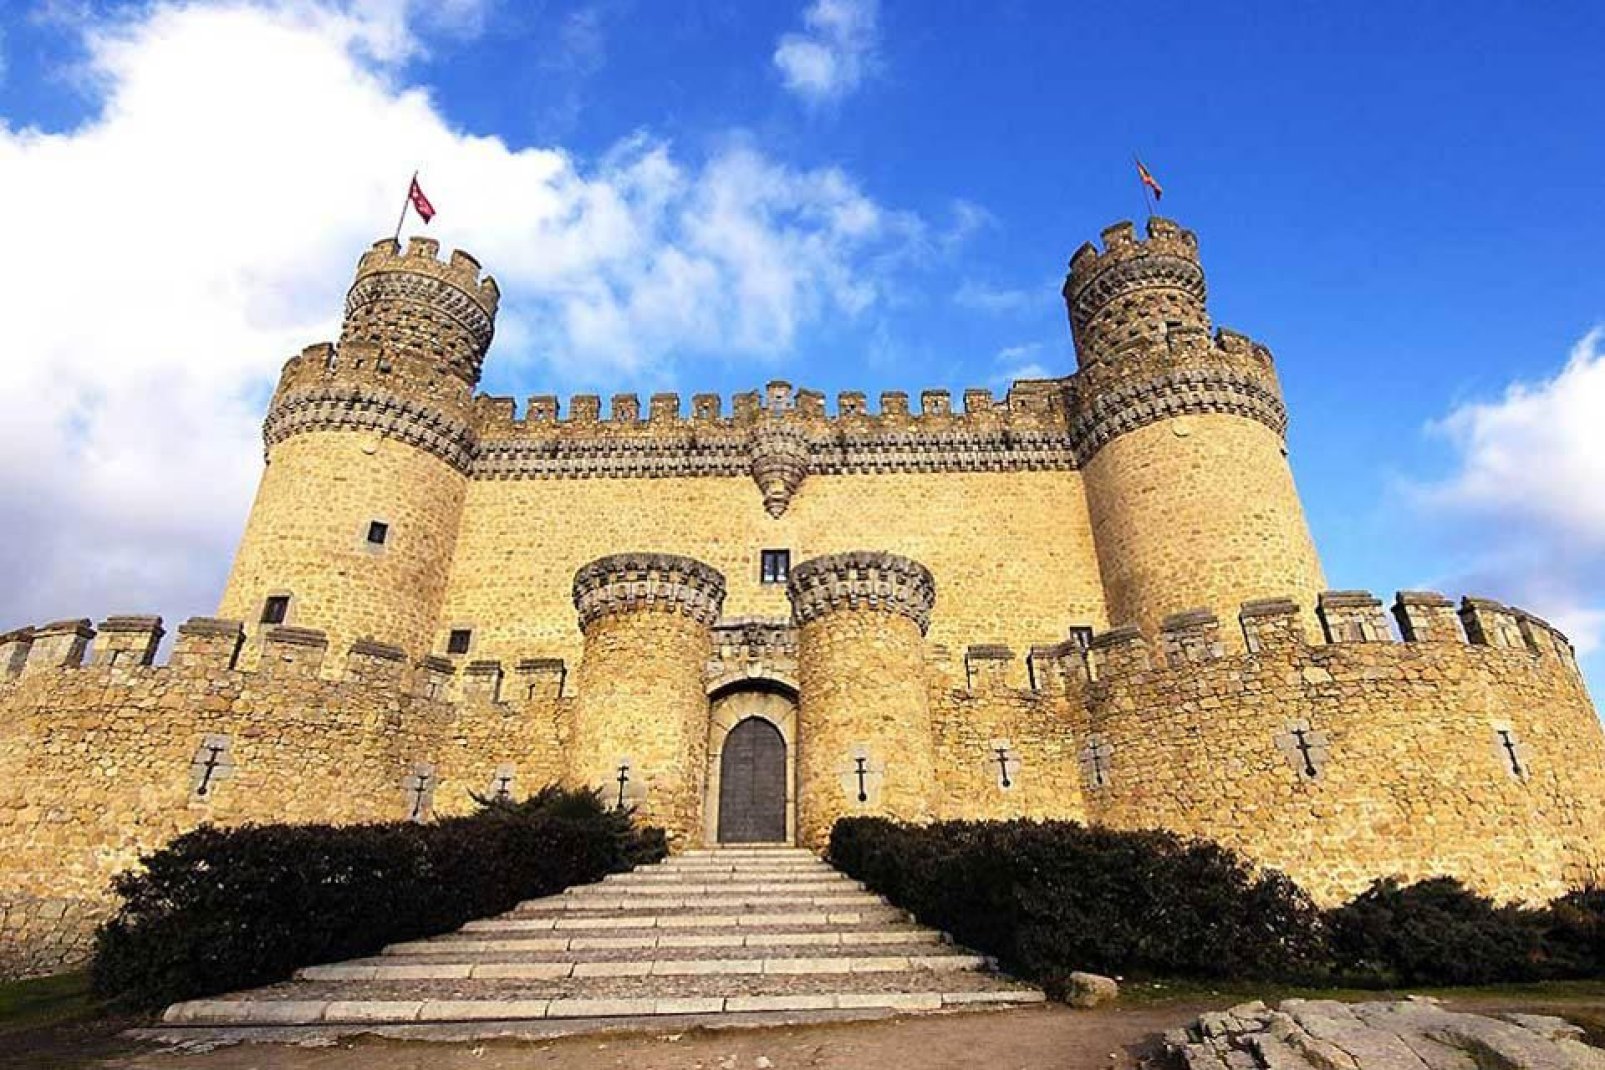 This fortified castle dating from the Middle Ages is the best preserved one in the autonomous community of Madrid. It bears the stamp of Pedro Gonzalez de Mendoza of Toledo.